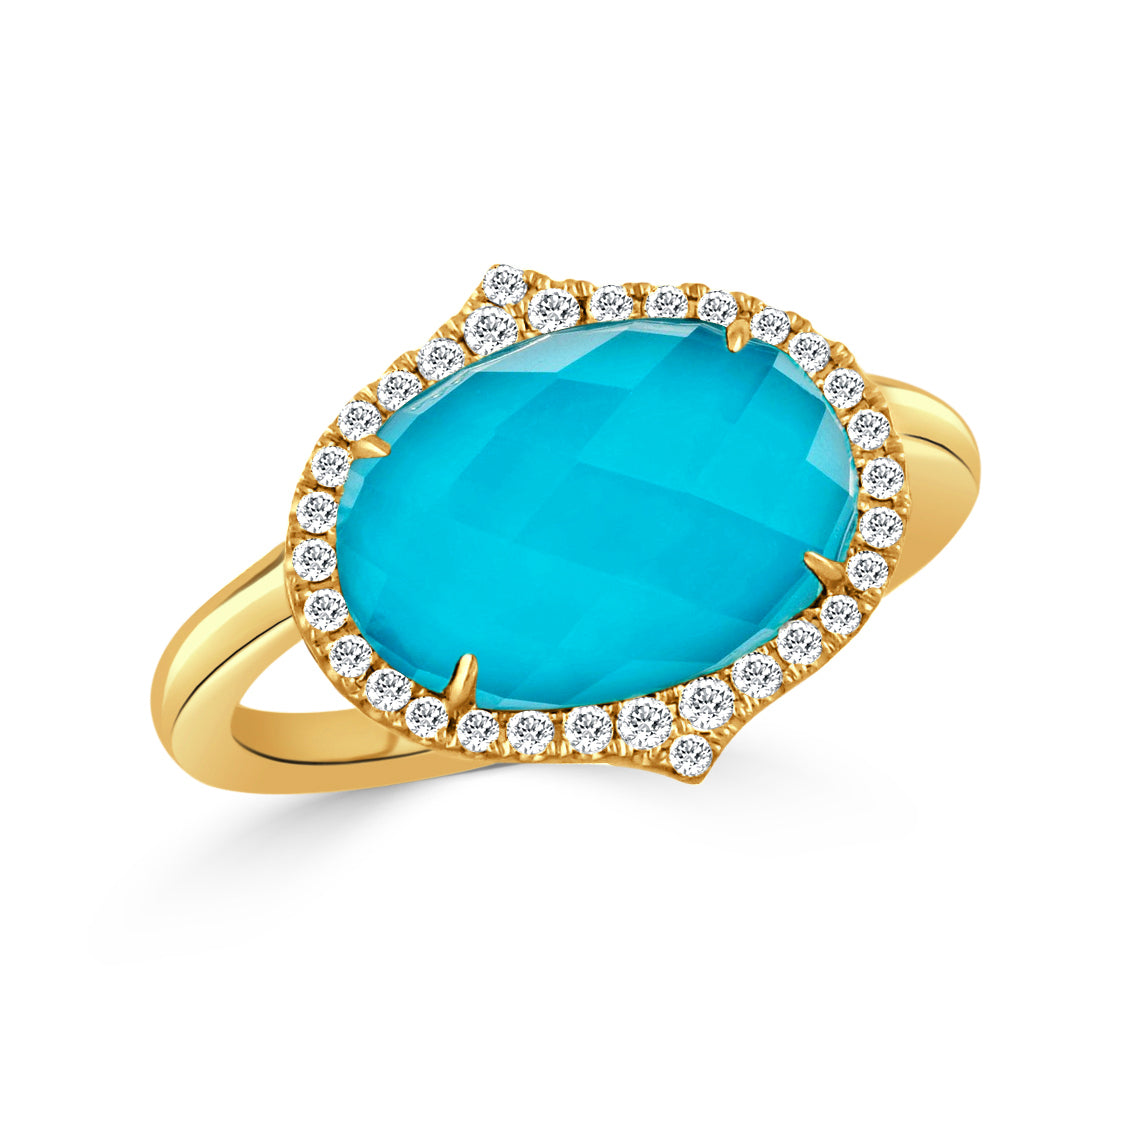 St. Barths Turquoise Ring